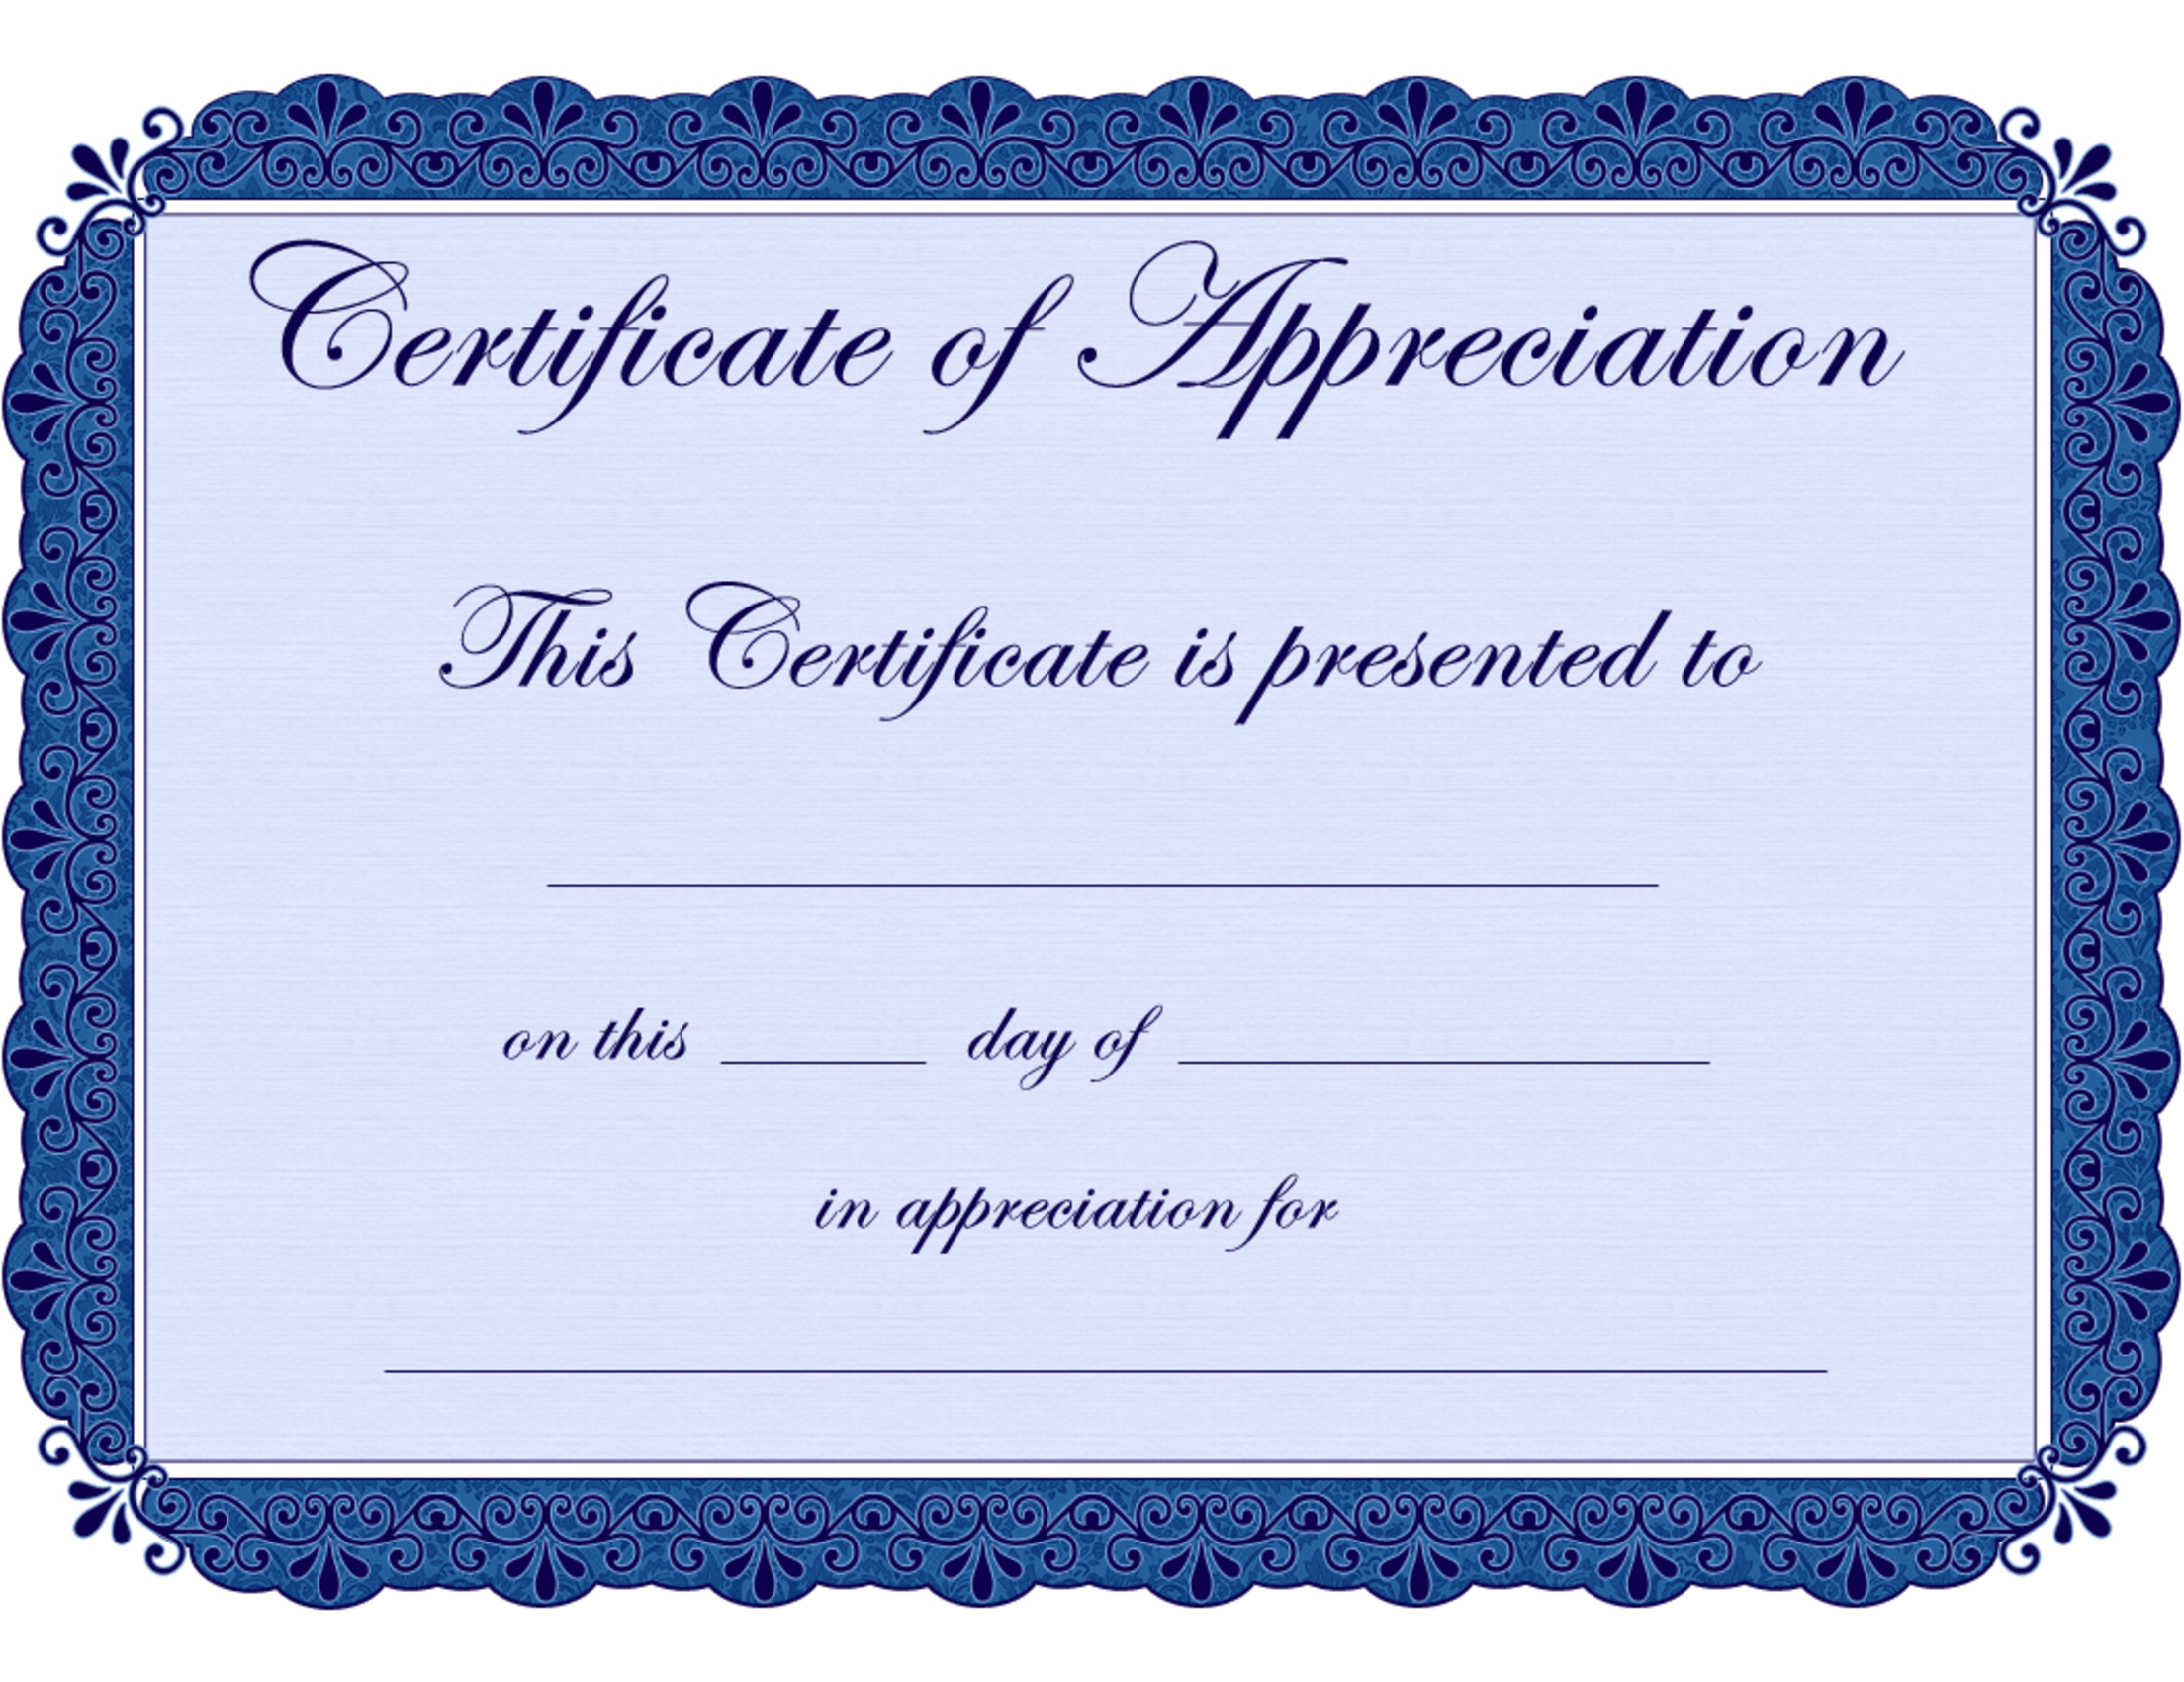 Free Printable Certificates Certificate Of Appreciation Certificate - Free Printable School Certificates Templates